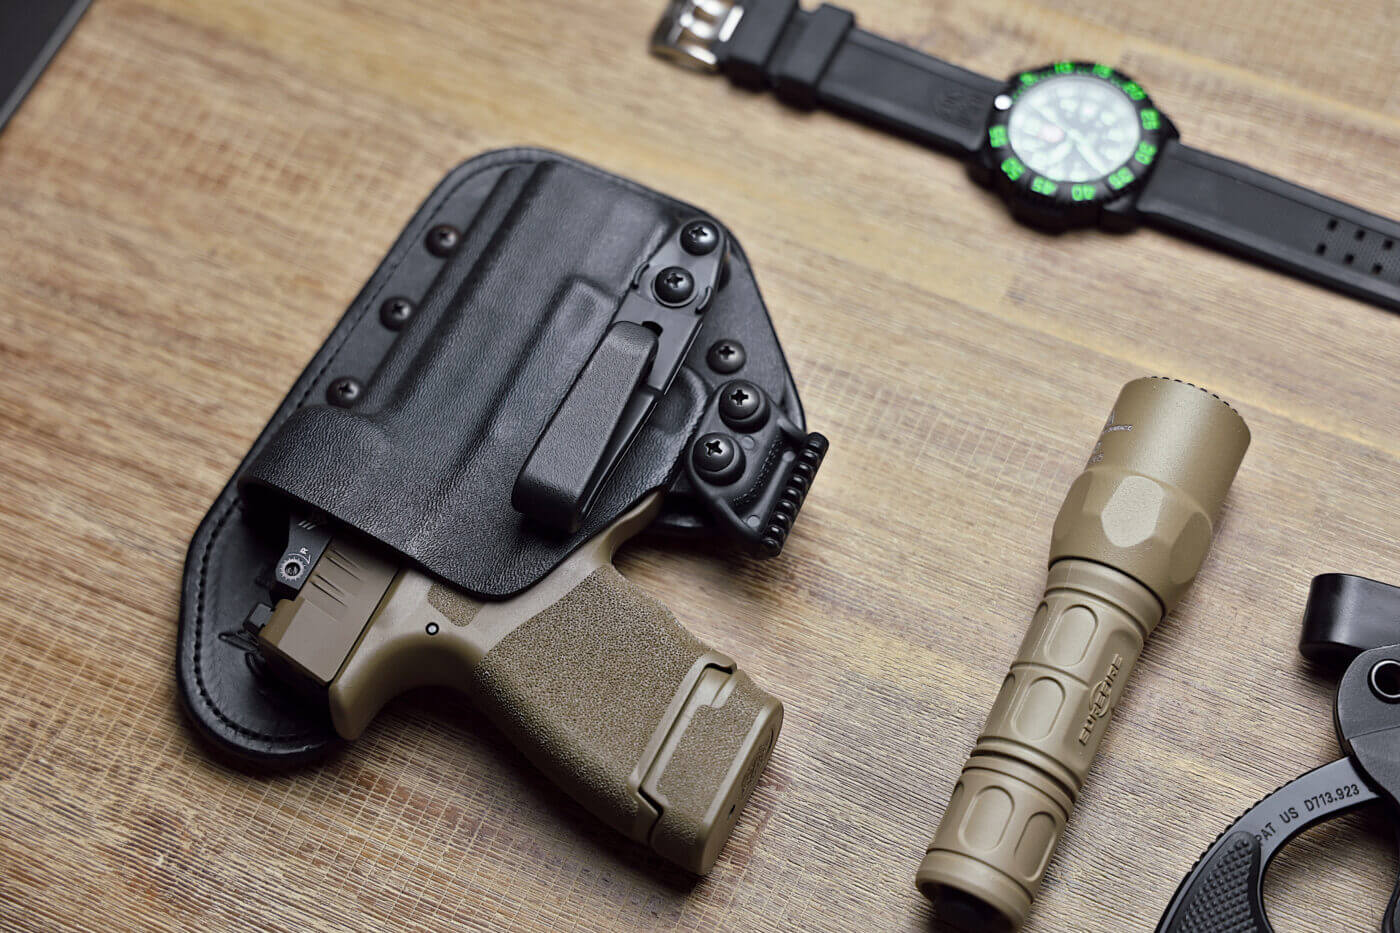 Close up look at the Hidden Hybrid holster